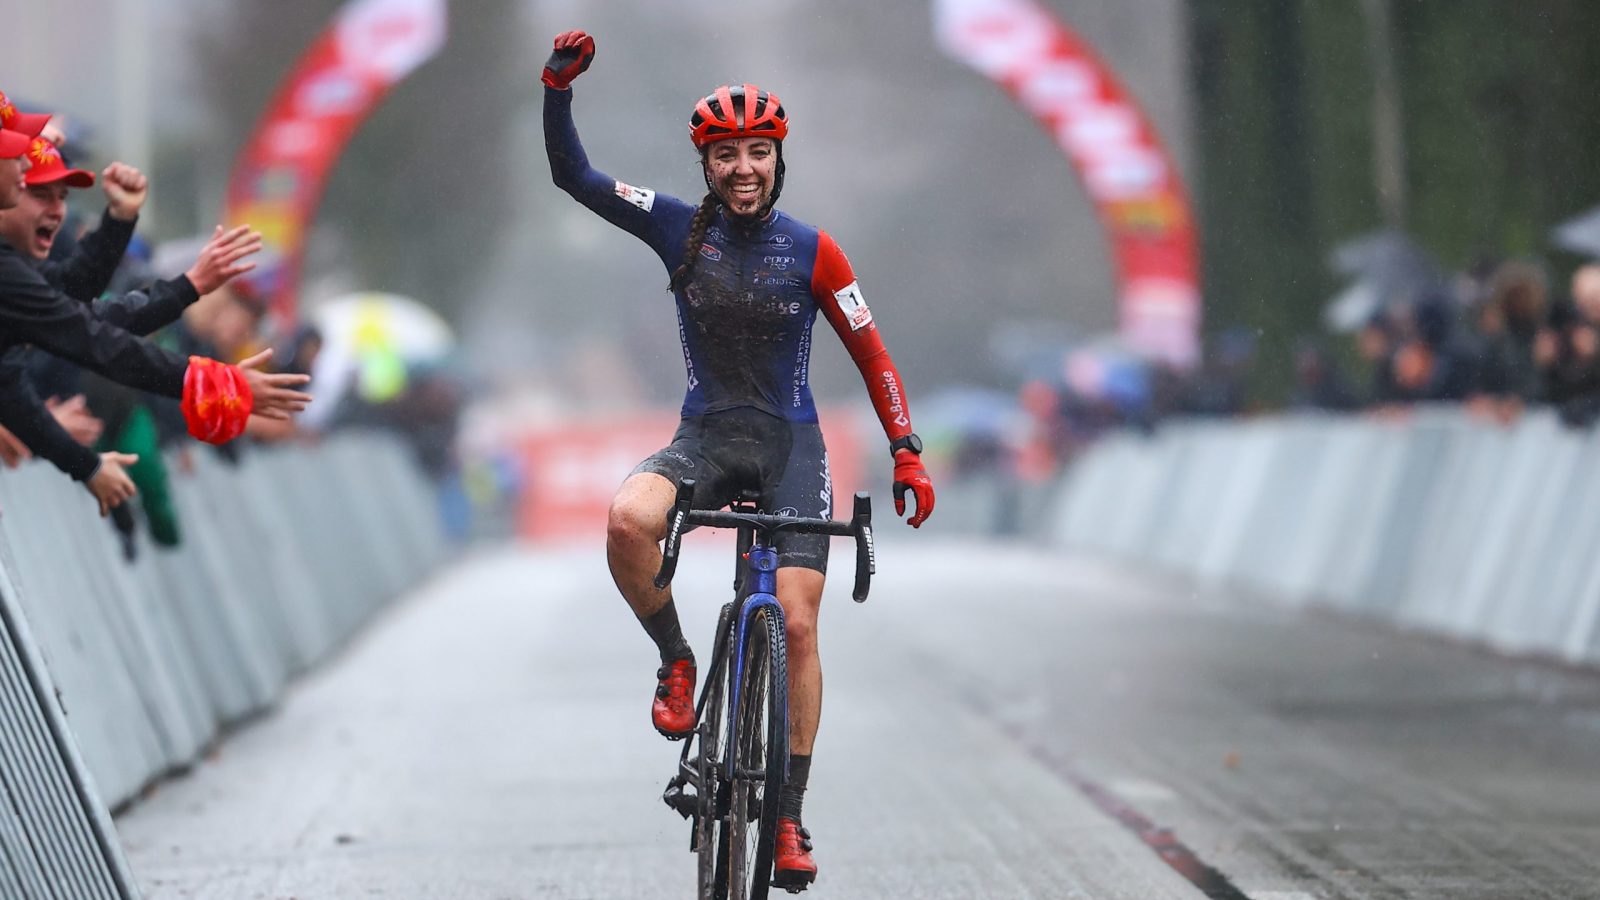 Dutch Shirin van Anrooij celebrates as she crosses the finish line to win the women's elite race of the cyclocross cycling event, race 6/8 in the 'Exact Cross' competition, Friday 30 December 2022 in Loenhout. BELGA PHOTO DAVID PINTENS